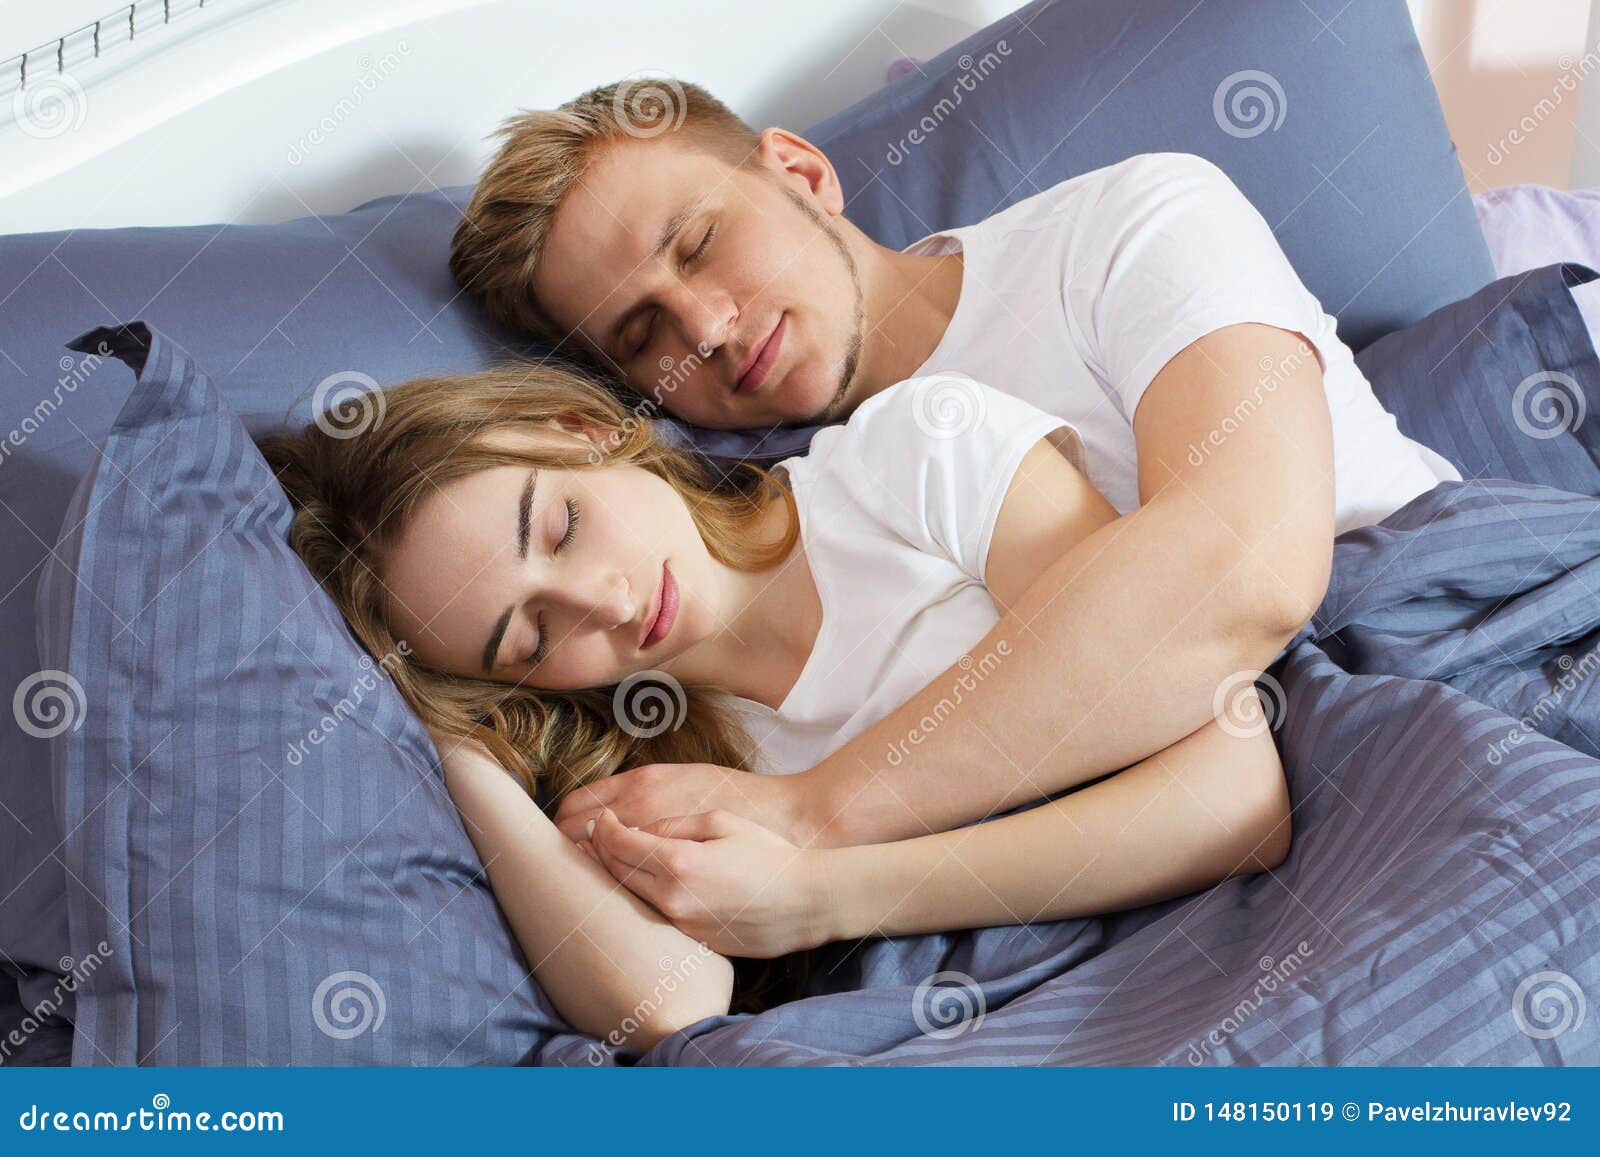 Young Cute Couple Sleeping Together in Bed. Comfortable Bed and ...